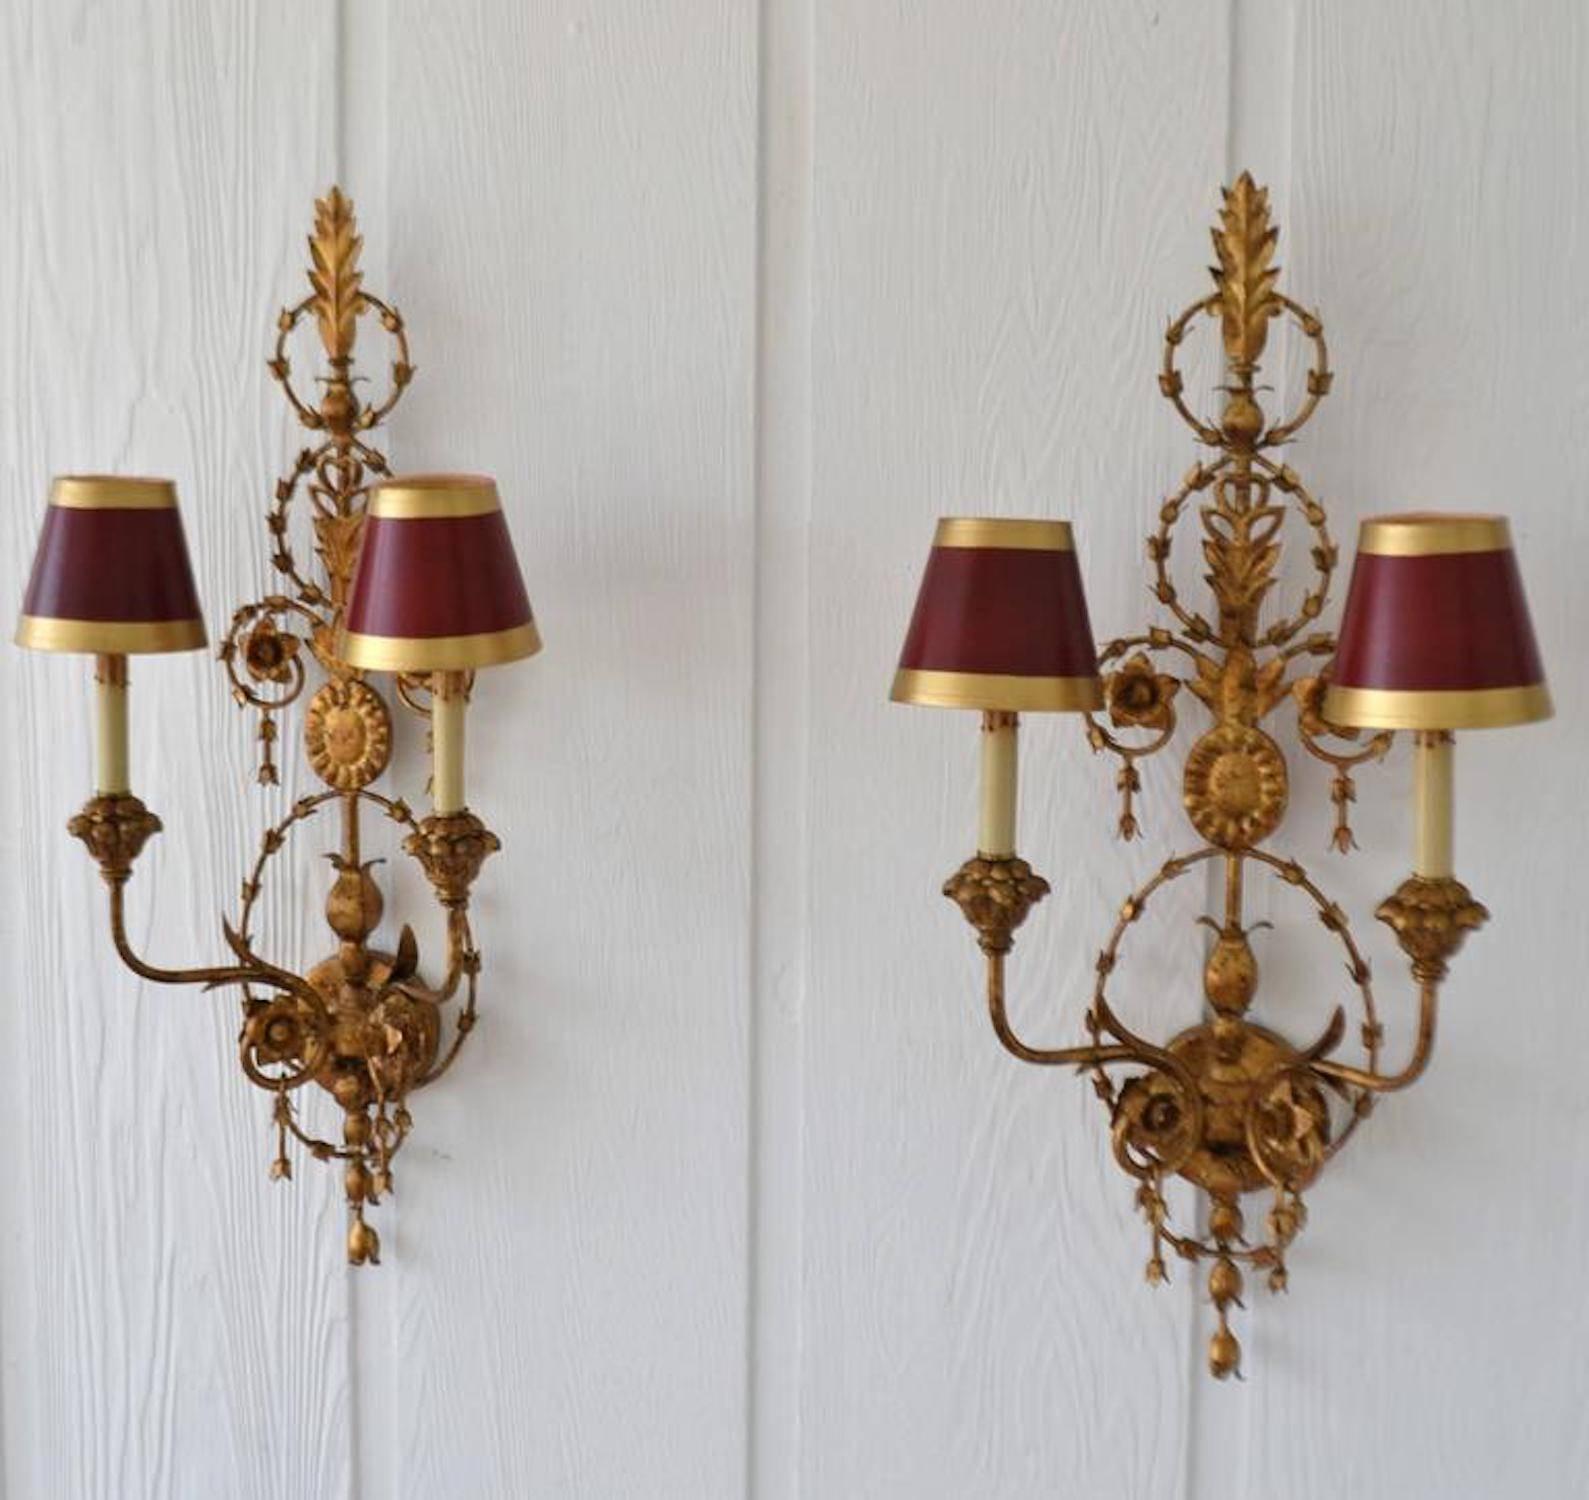 Neoclassical Revival Pair of Gilt Metal Two-Arm Sconces